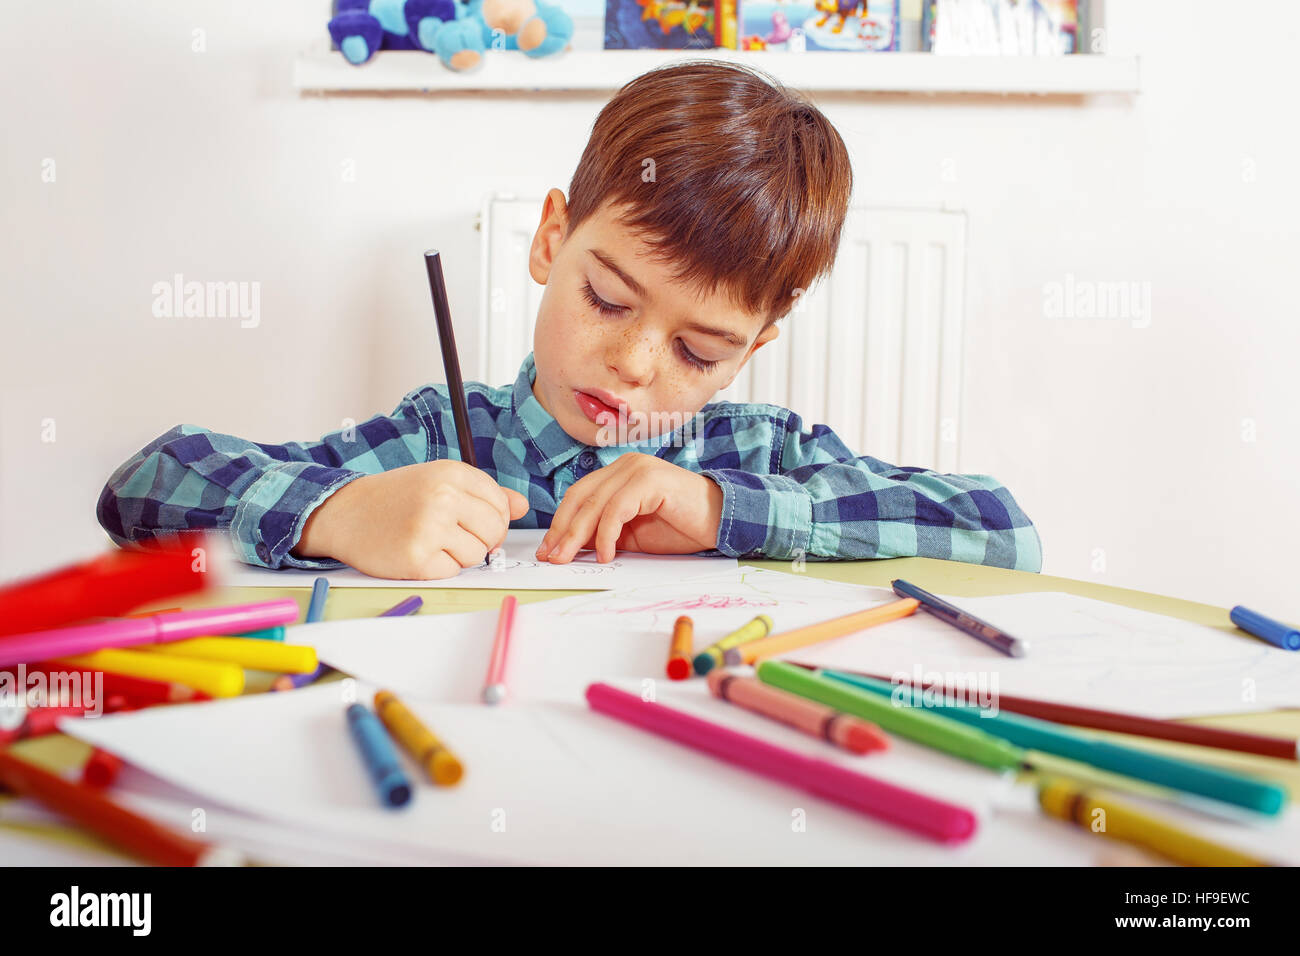 Brown-haired boy in checkered shirt drawing using a pencil Stock Photo -  Alamy